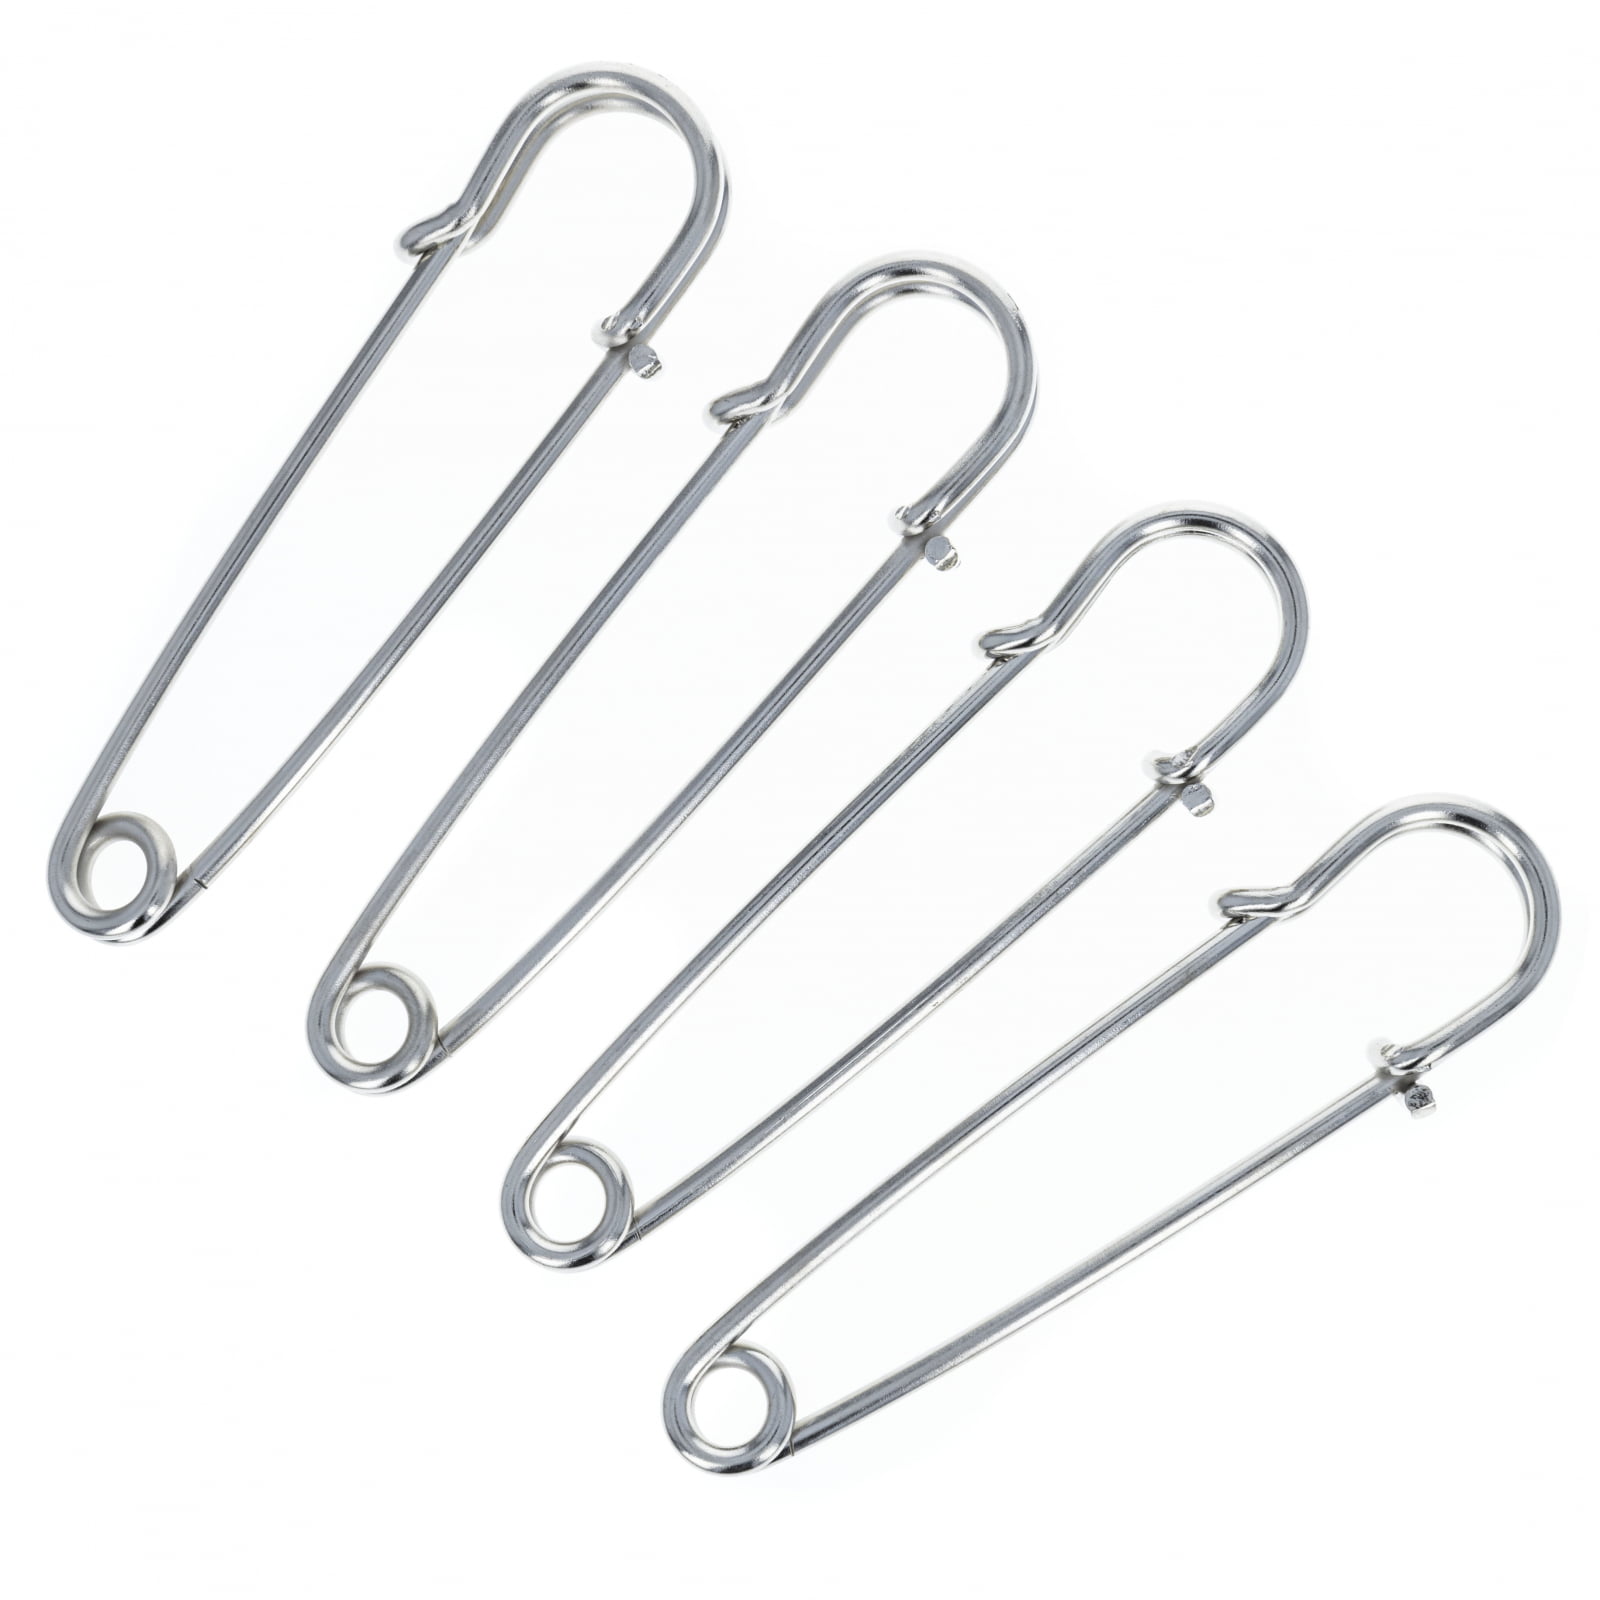 NEW METAL SAFETY PINS SILVER SEWING COSTUME CRAFT DRESS MAKING TOP QUALITY